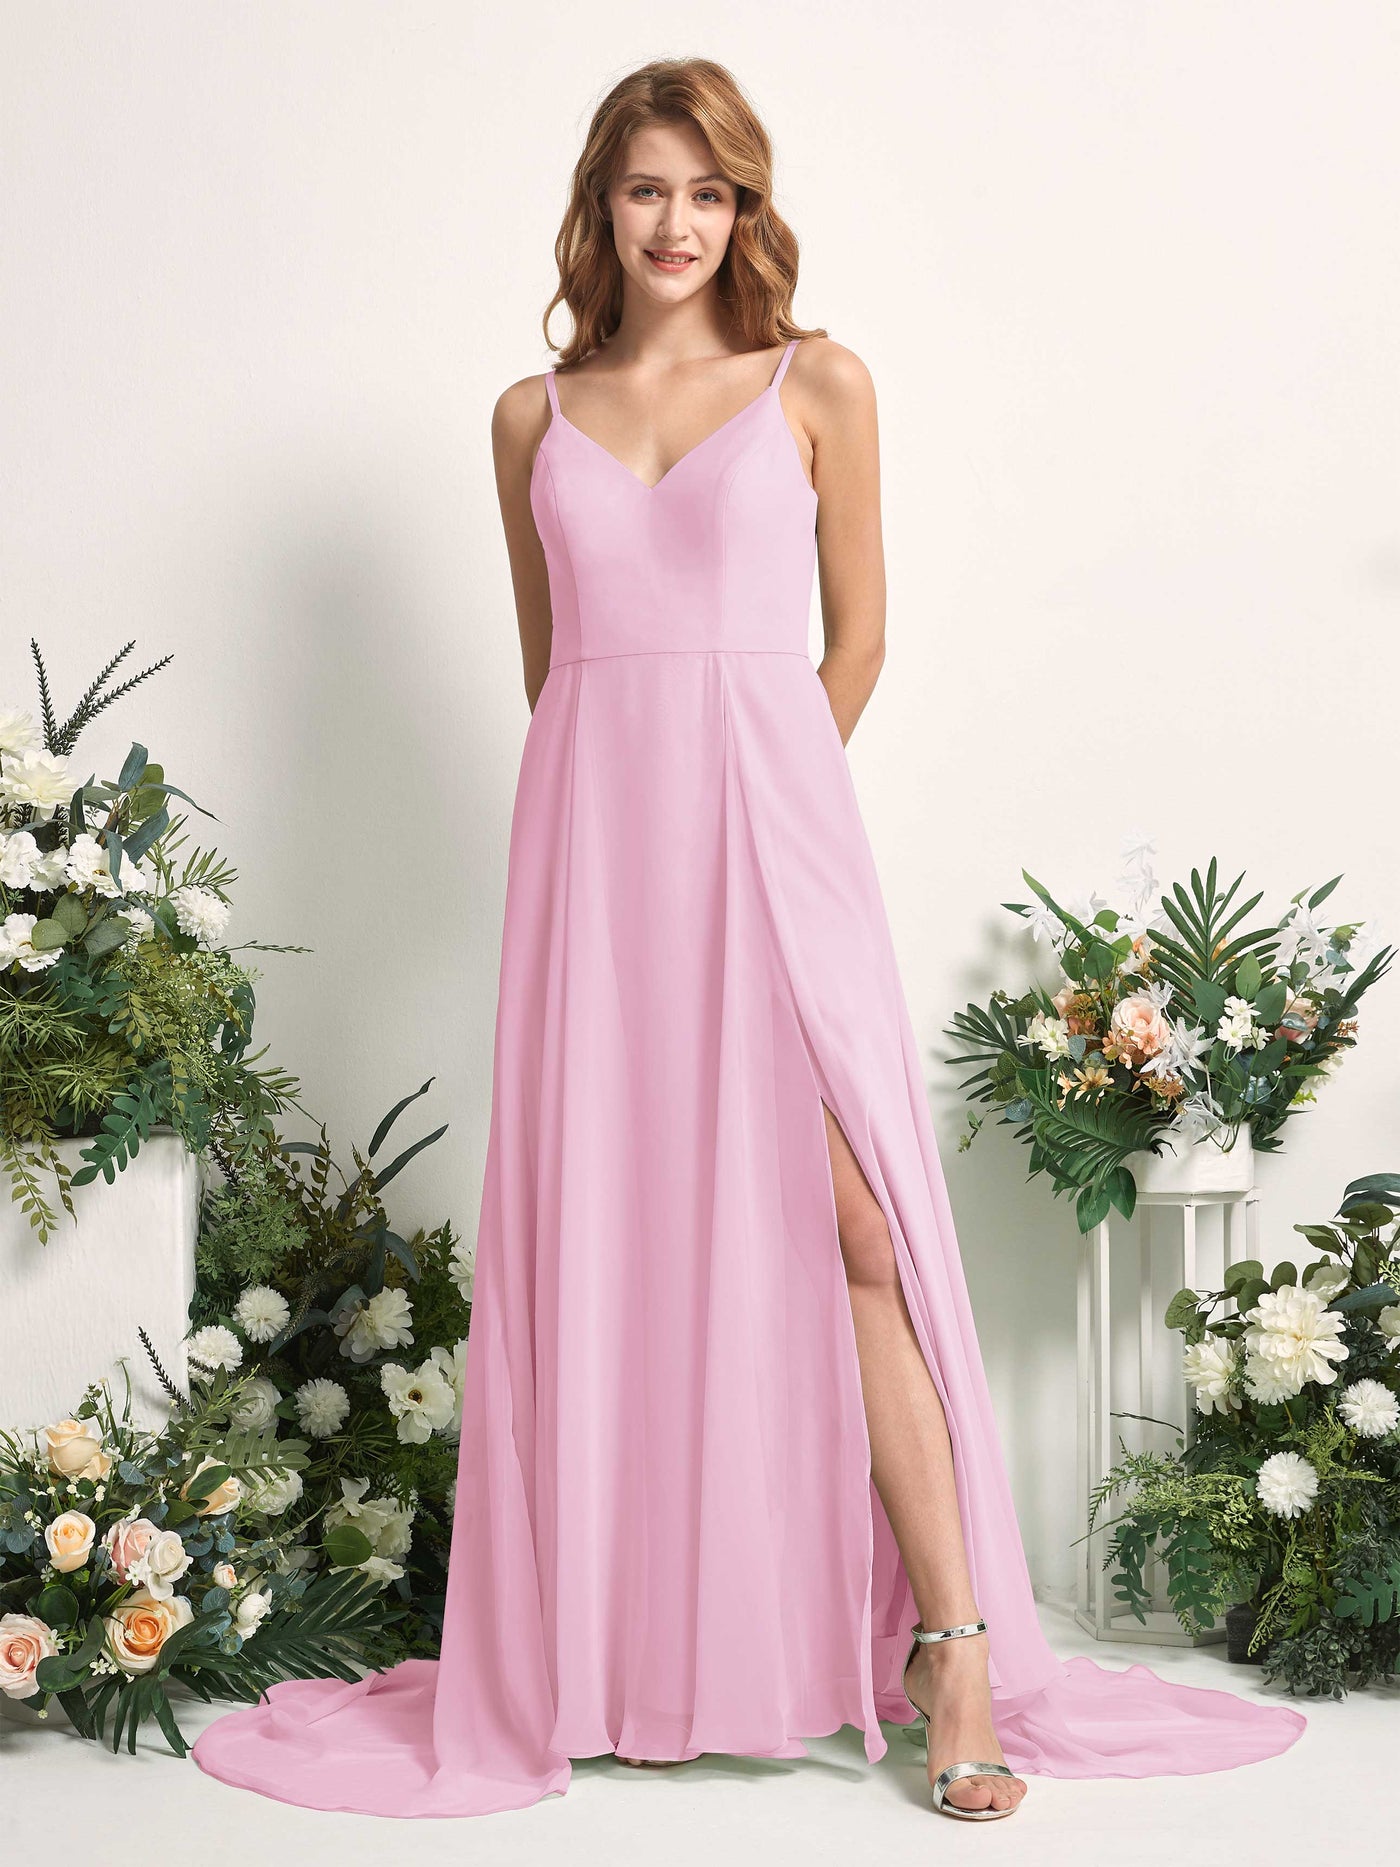 Bridesmaid Dress A-line Chiffon Spaghetti-straps Full Length Sleeveless Wedding Party Dress - Candy Pink (81227739)#color_candy-pink